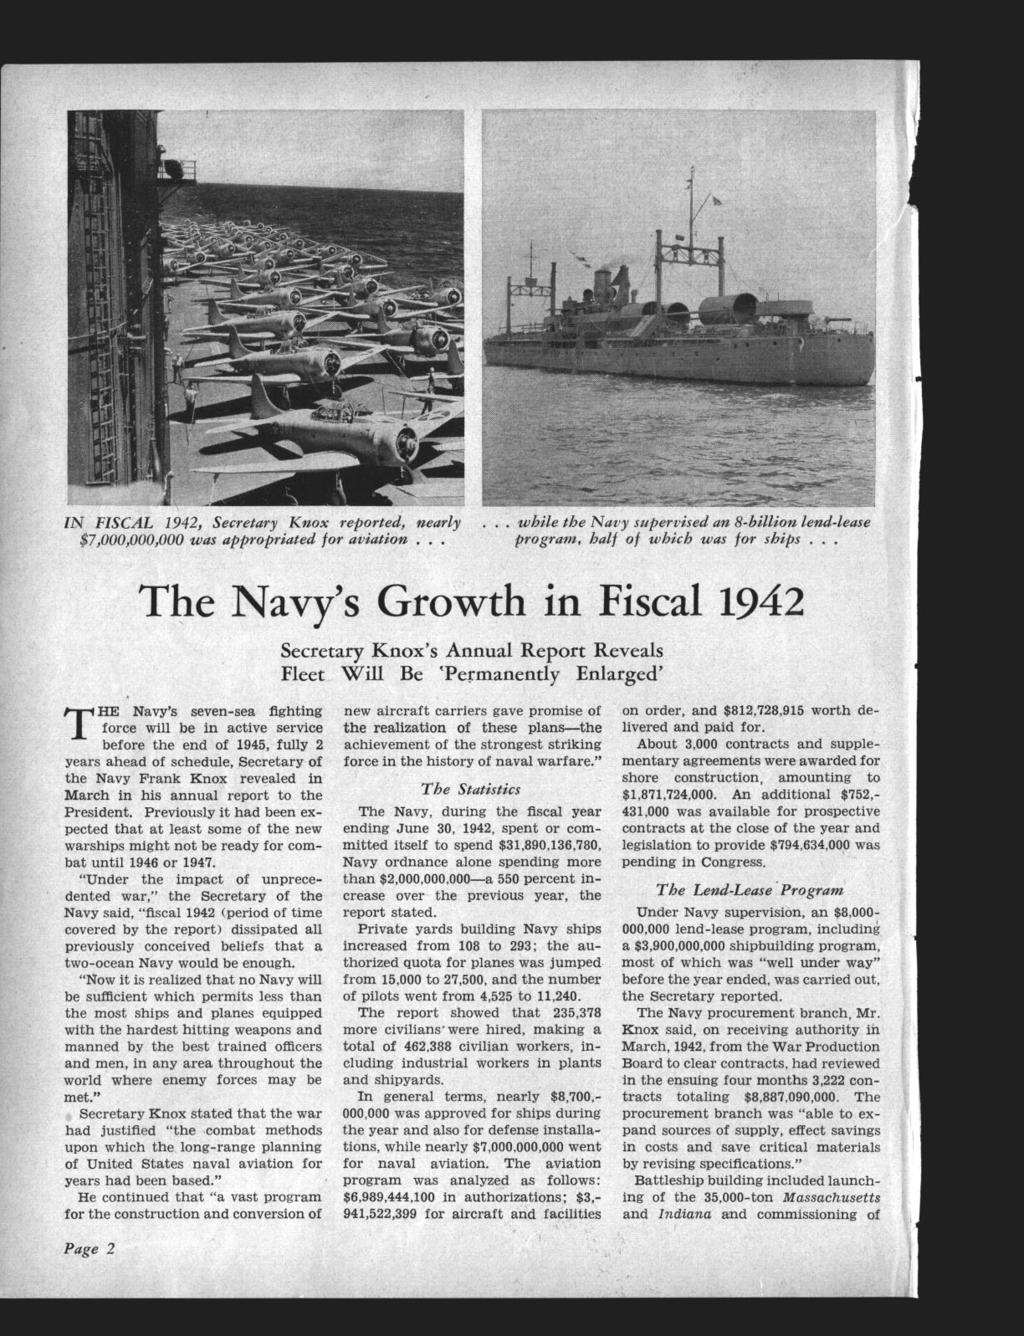 IN FISCAL 1942, Secretry Knox reported, nerly $7,000,000,000 ws pproprited for vitiom...... while the Nuy superwised lz 8-billion lend-lese progrm, hlf of which ws for ships.